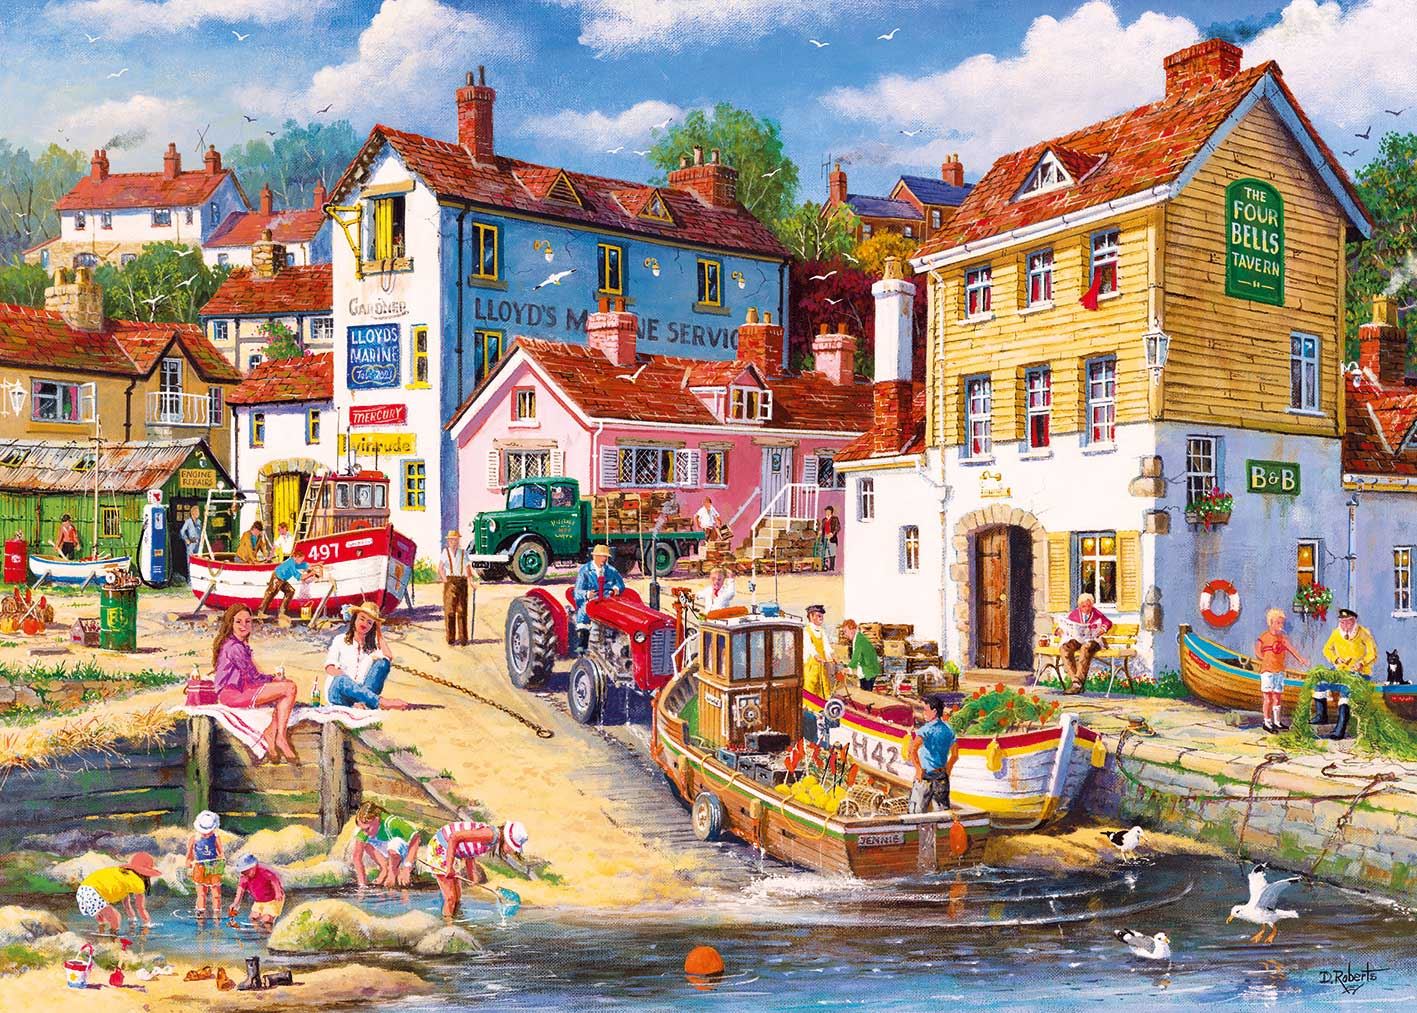 Gibsons The Four Bells Jigsaw Puzzle (1000 pieces)